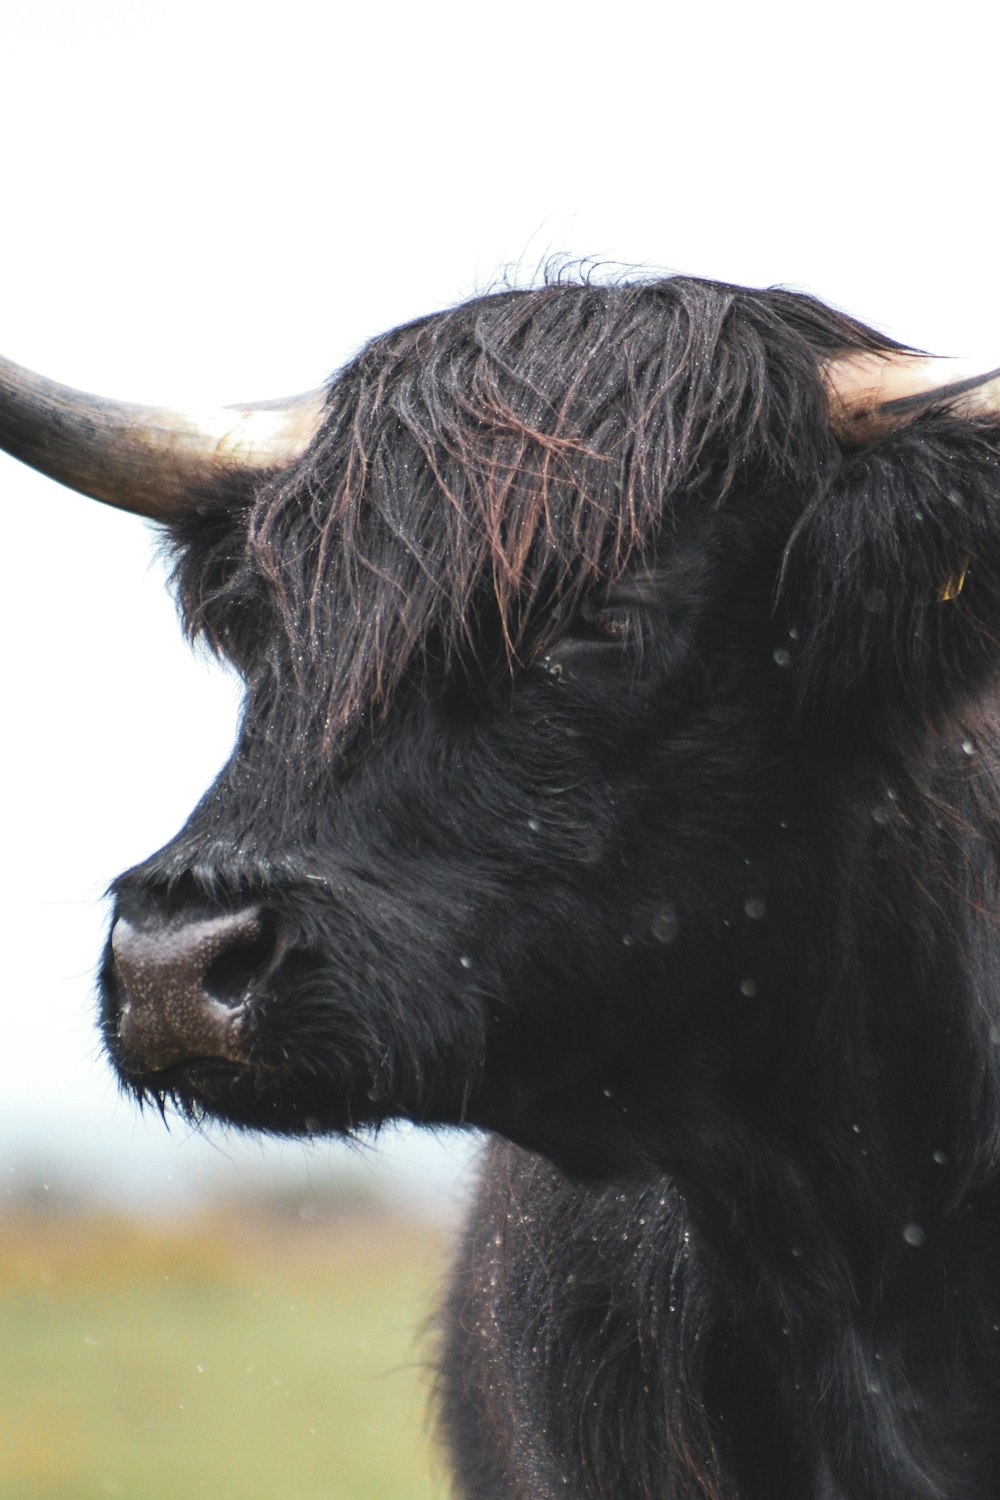 a close up of a cow